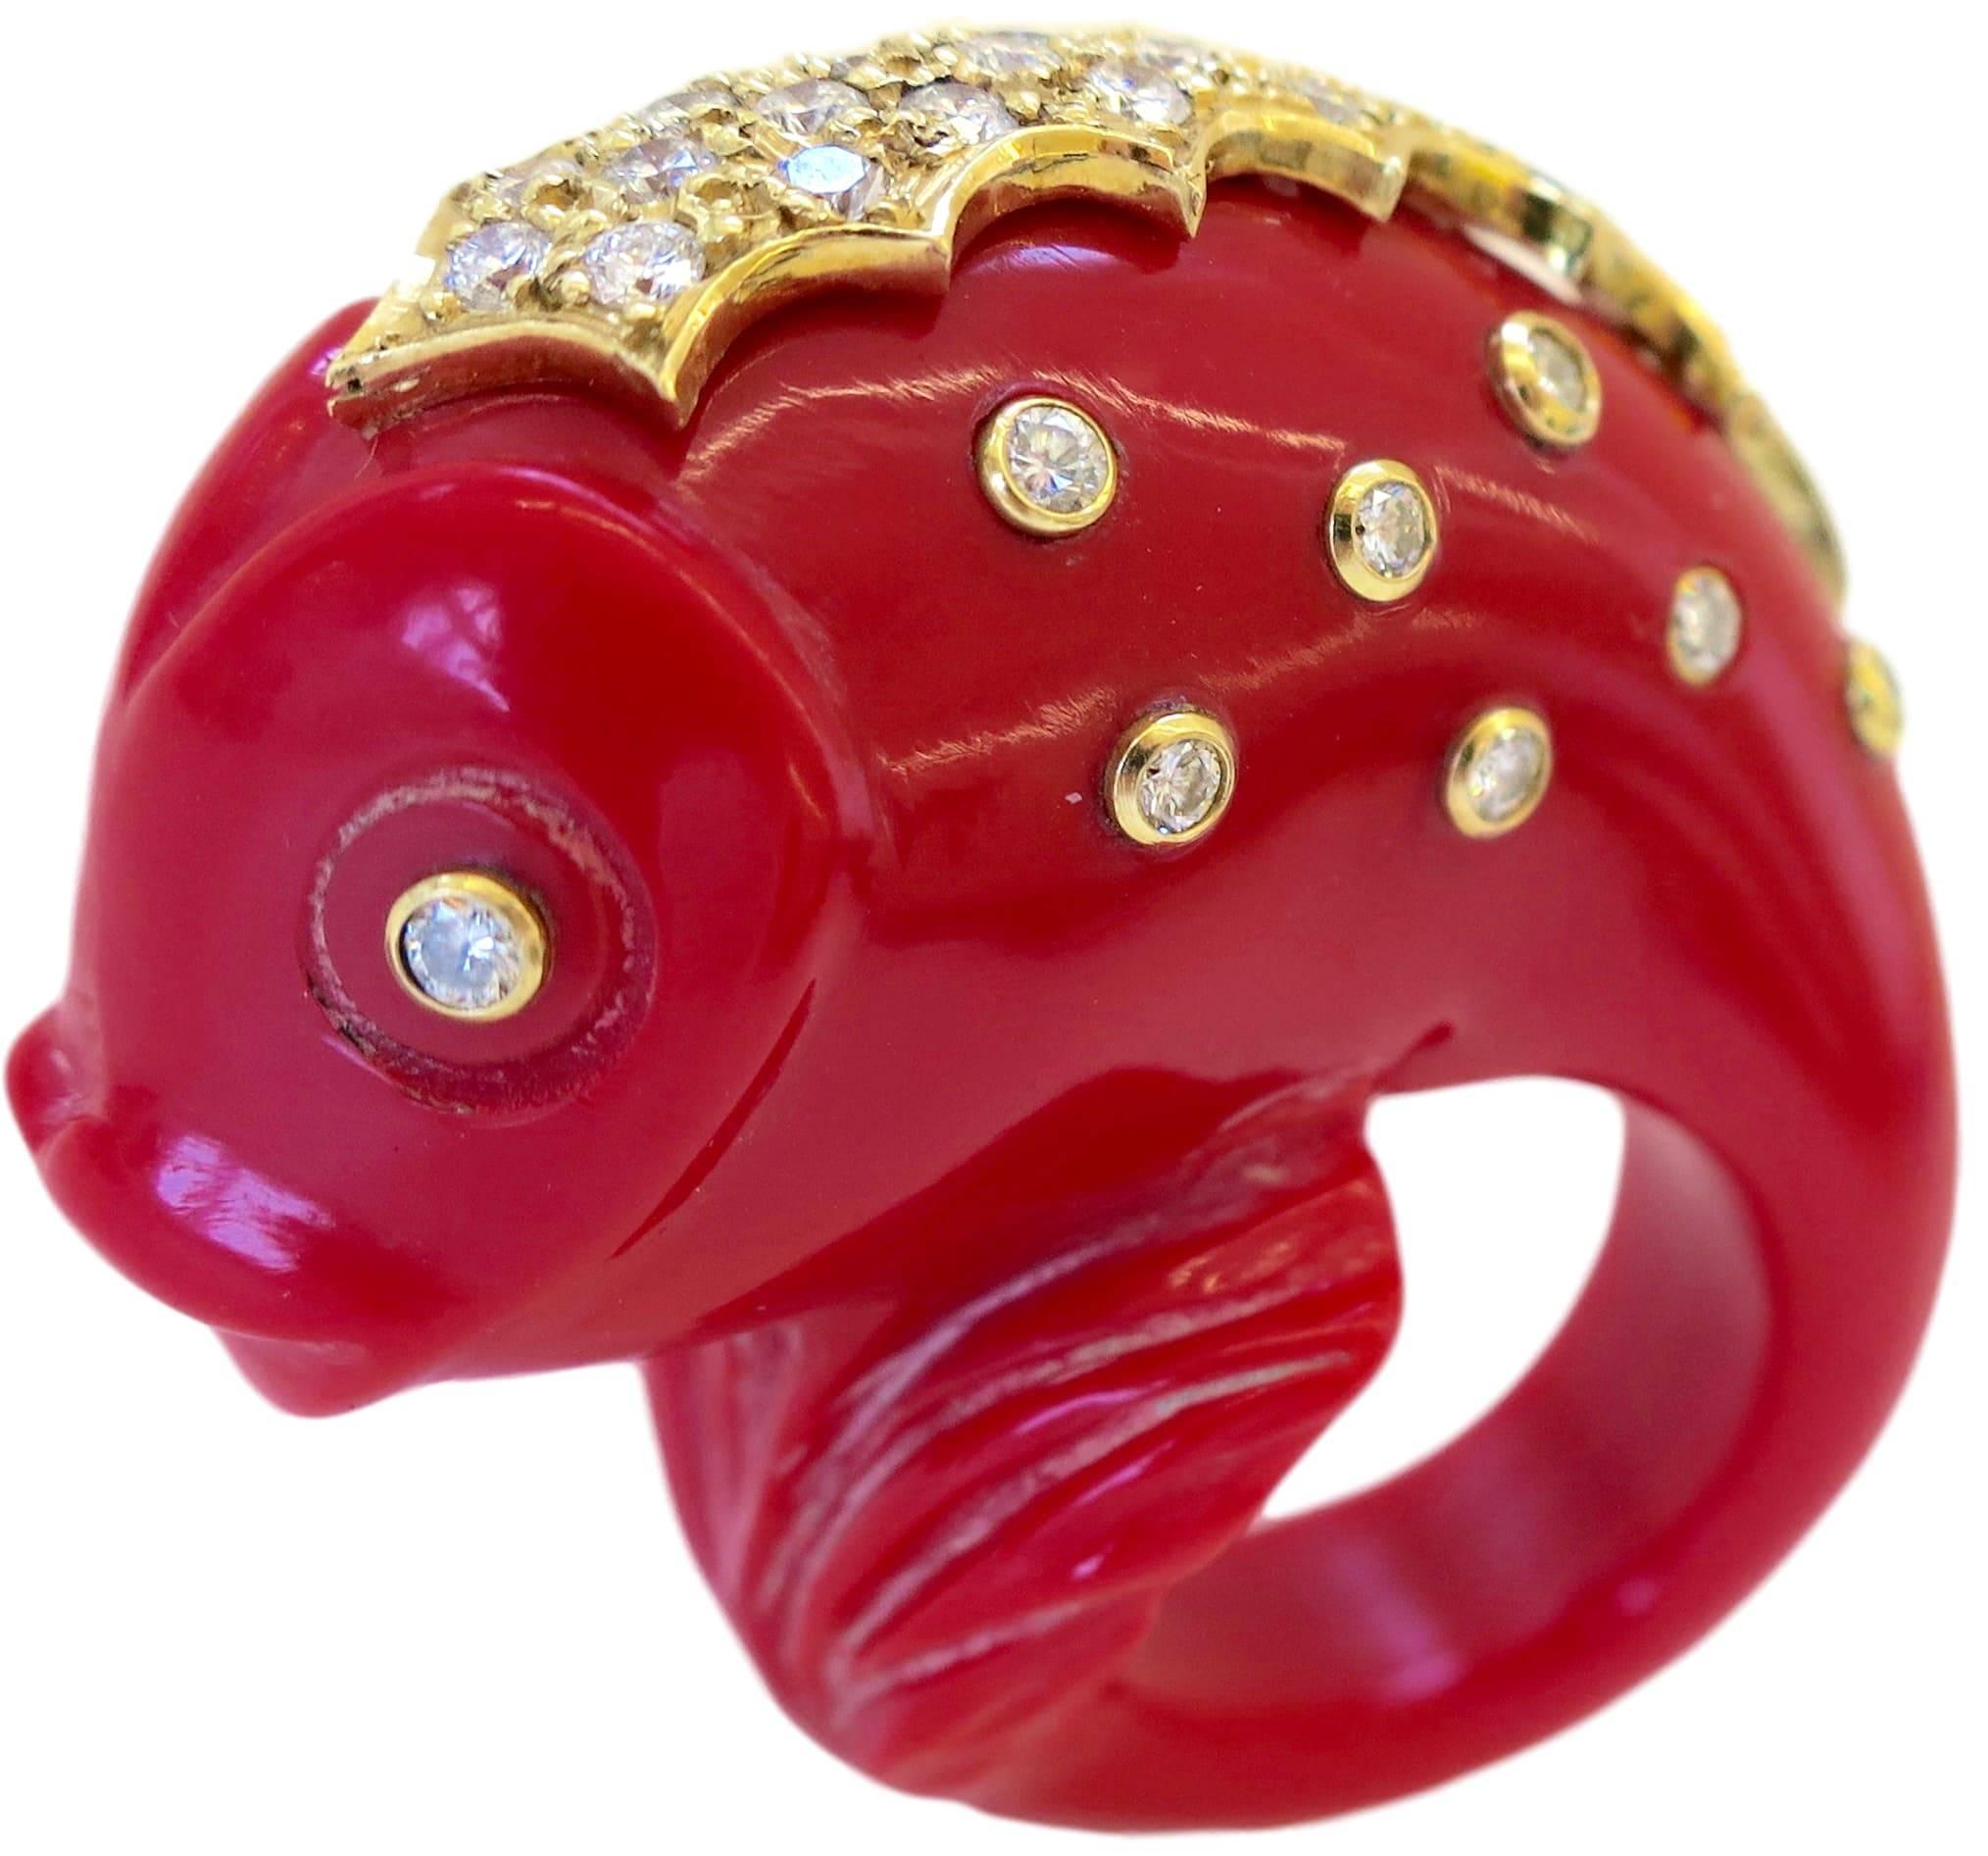 Vintage gold and diamond cocktail ring with fish motif by Italian designer Antonia Miletto. The 1.50 inch h x 1inch wide hand-carved red resin ring  in the shape of a dolphin with an 18k yellow gold and pave diamond fin, enhanced with bezel set